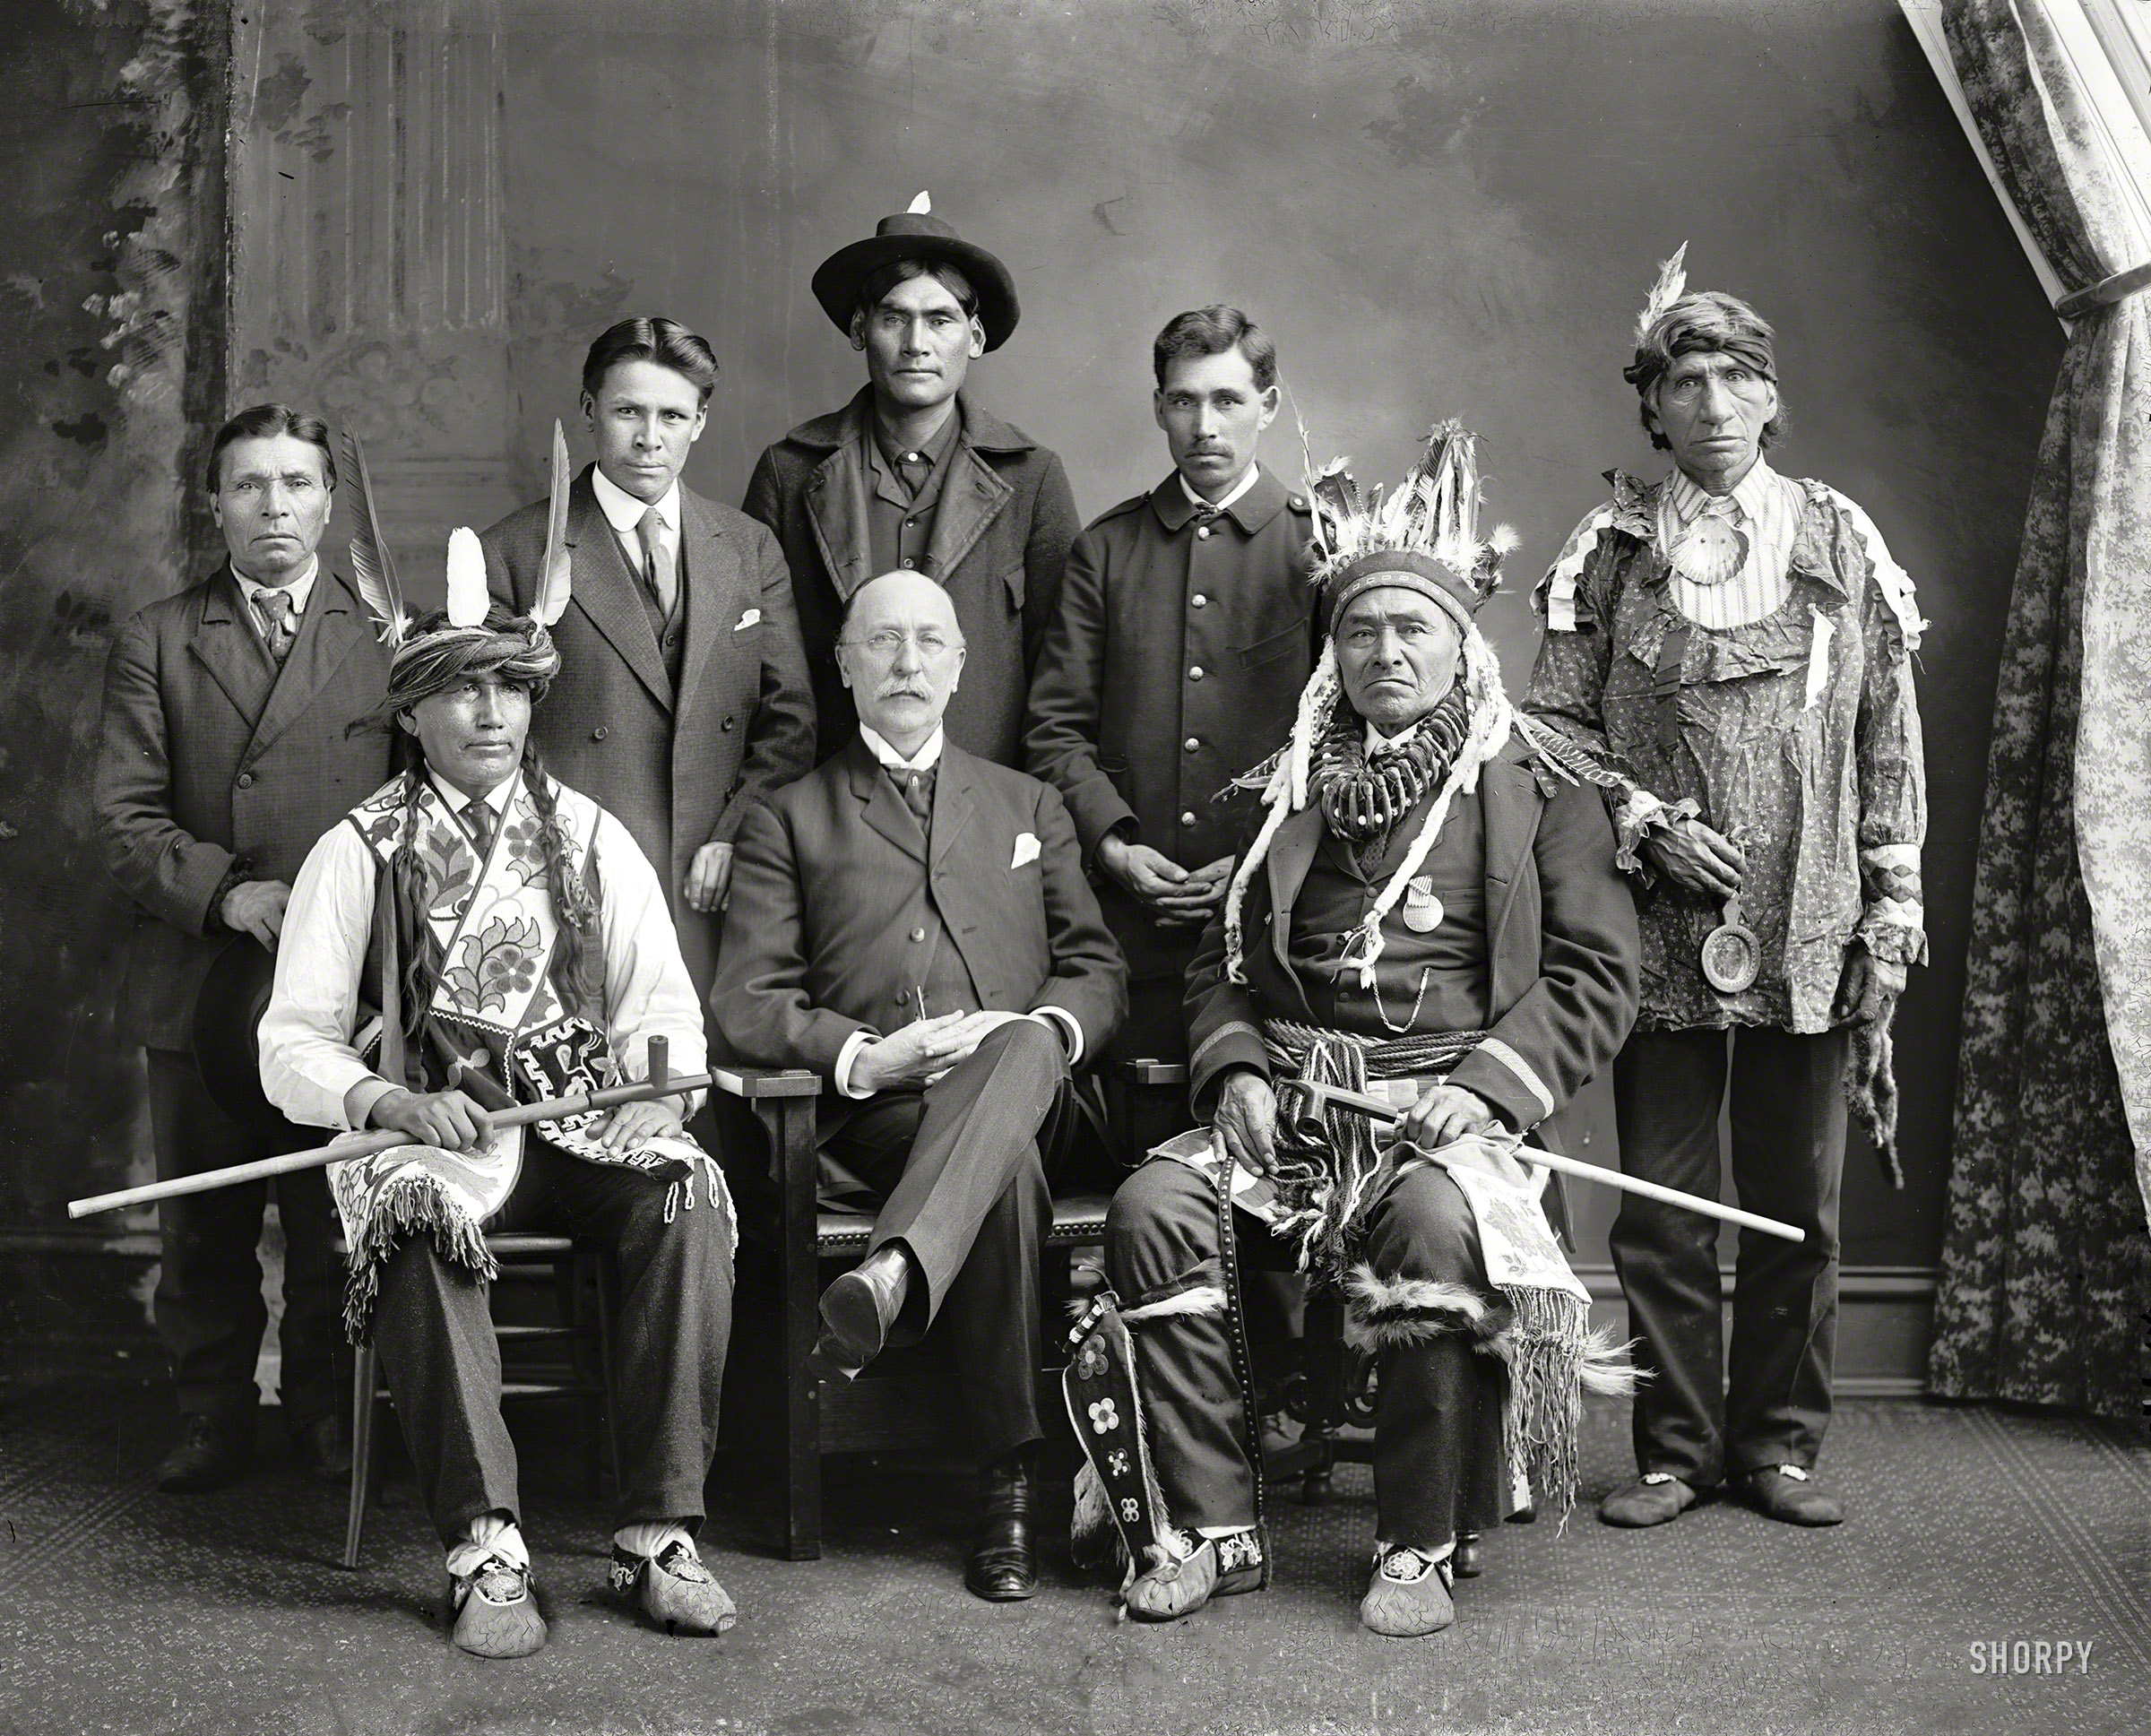 Washington, D.C., ca. 1900s. "Flatmouth, Chief, group." Chief Flatmouth, the formidable-looking gent seated at right, is wearing a medal that reads REDMEN'S CONVENTION, WALKER MINN., Aug. 12th 1901. The bald fellow and the Chief's lieutenants await identification. Harris & Ewing photo. View full size.